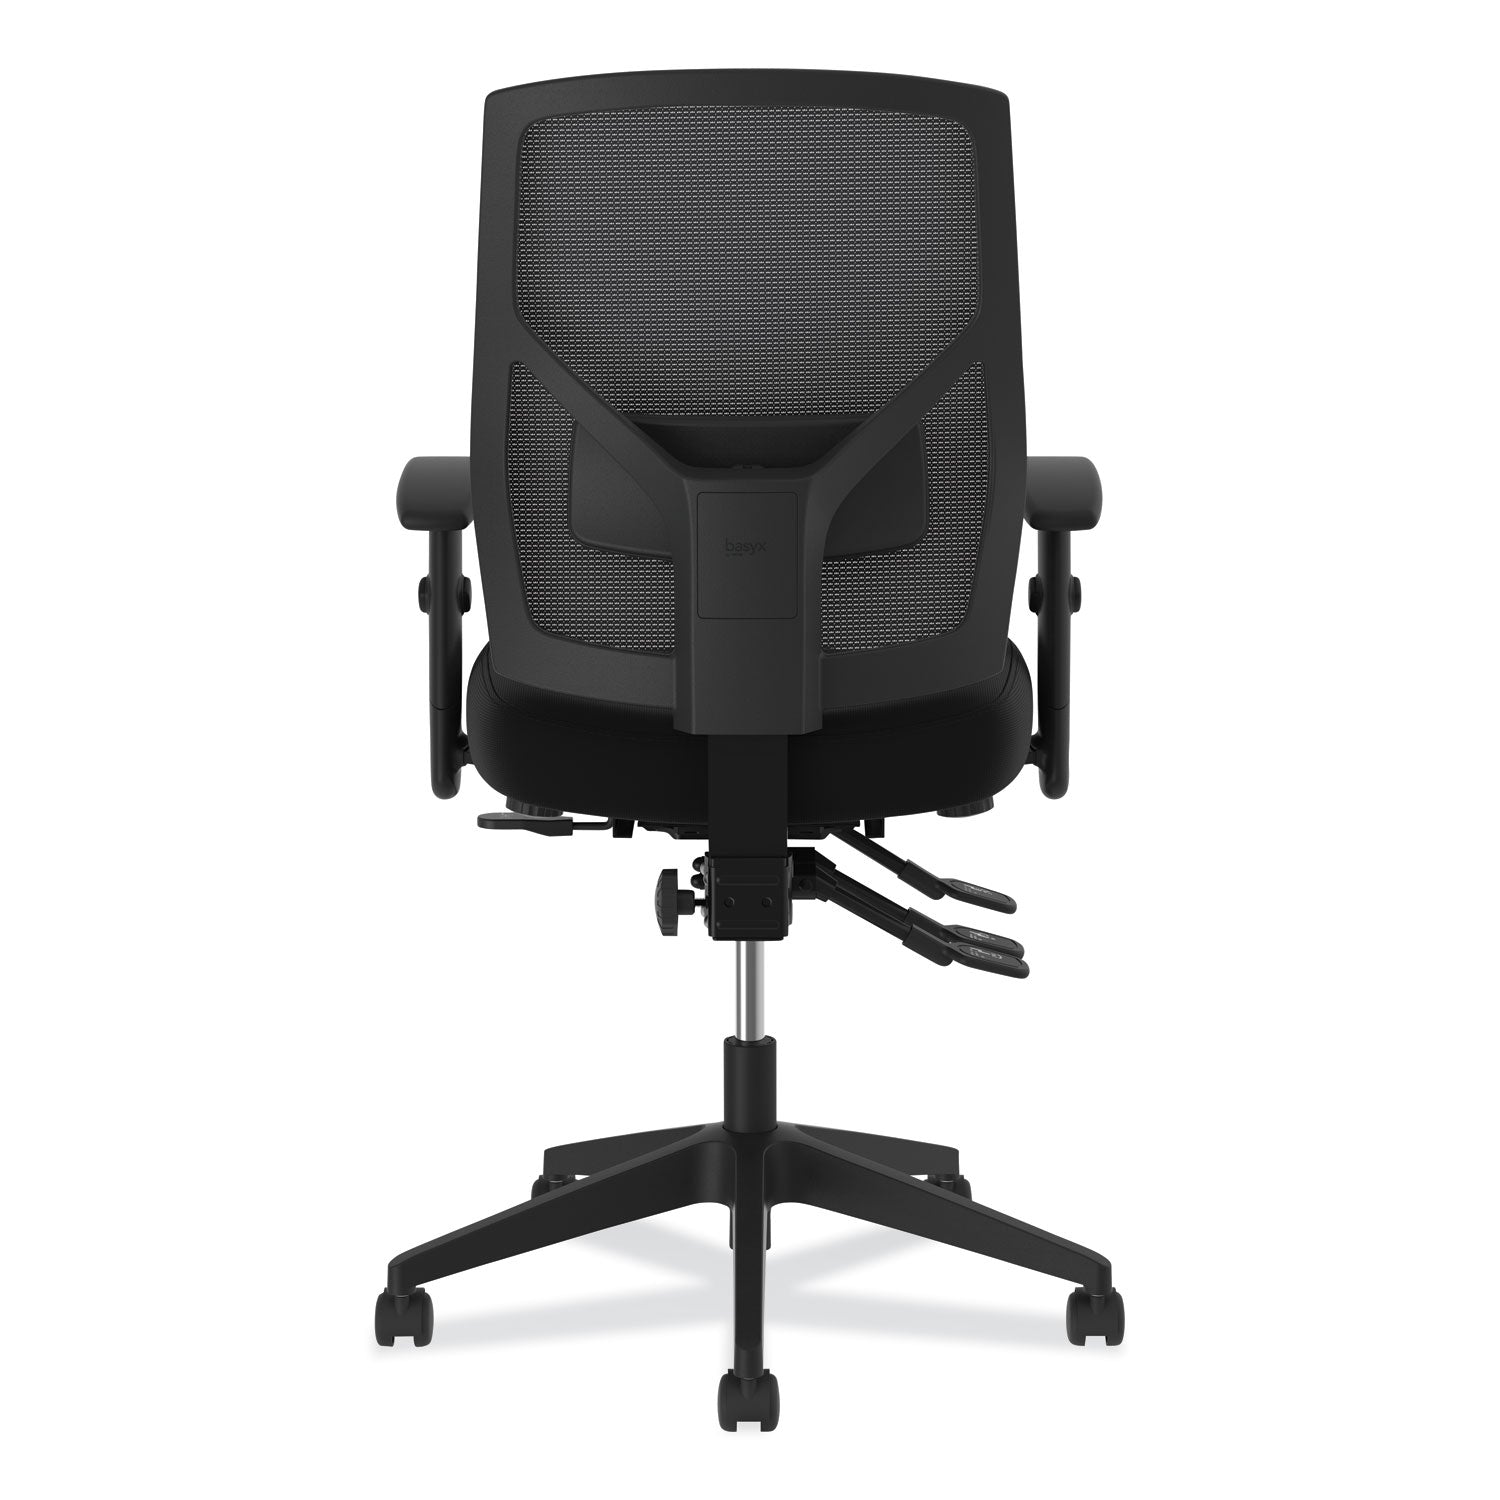 crio-high-back-task-chair-with-asynchronous-control-supports-up-to-250-lb-18-to-22-seat-height-black_bsxvl582sb11t - 4